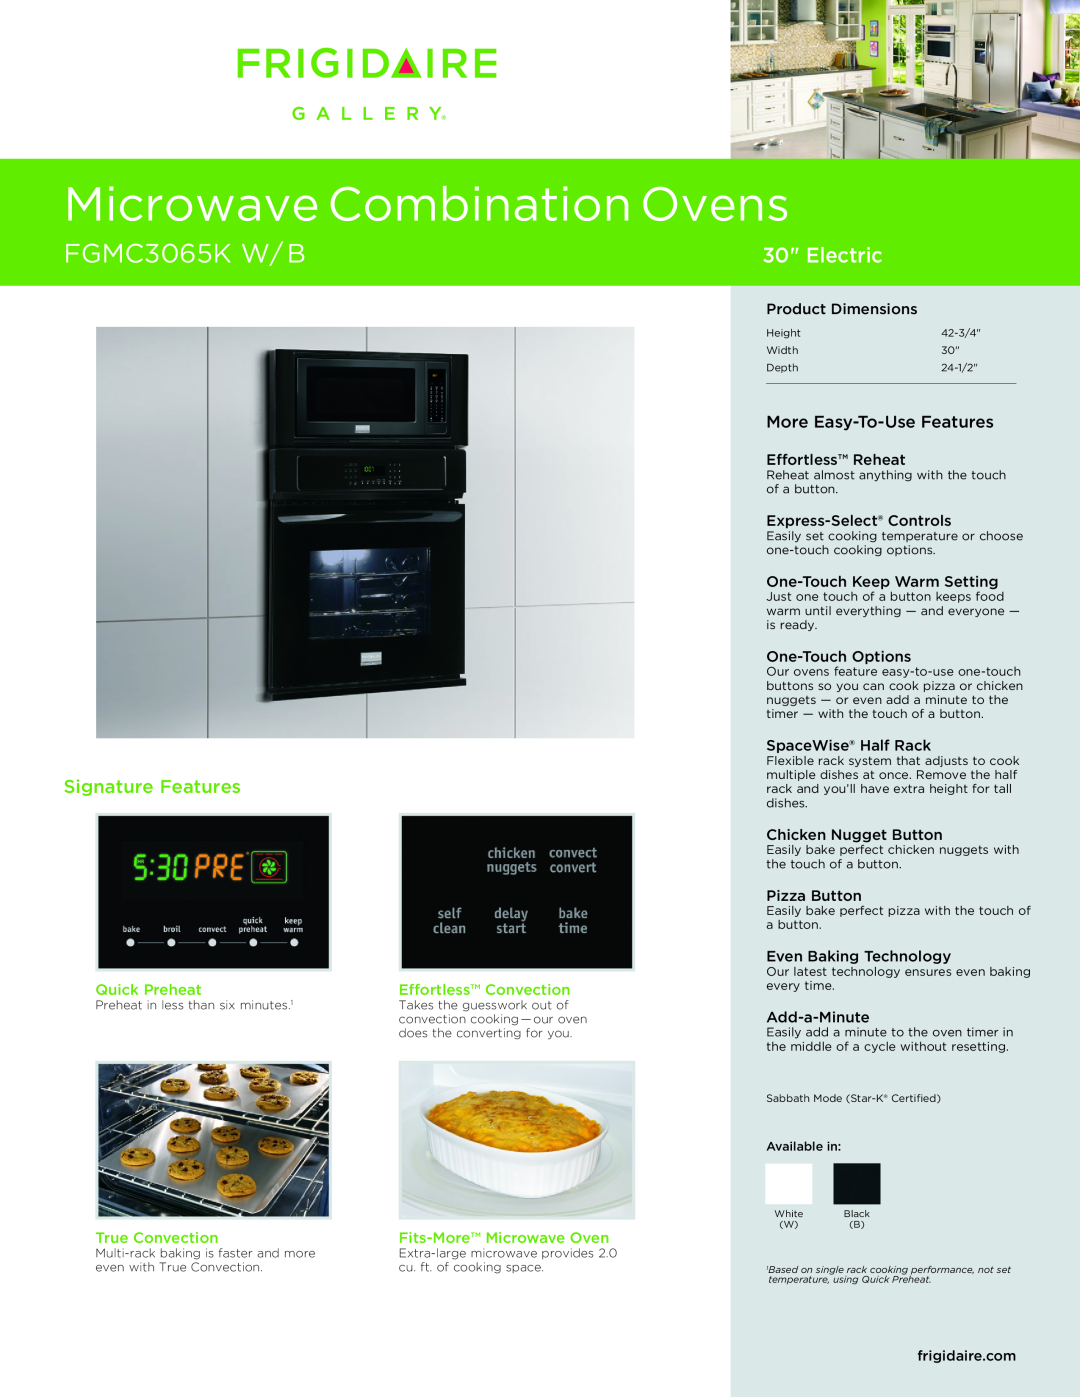 Frigidaire FGMC3065K W/B dimensions Quick Preheat, Effortless Convection, True Convection, Fits-More Microwave Oven 